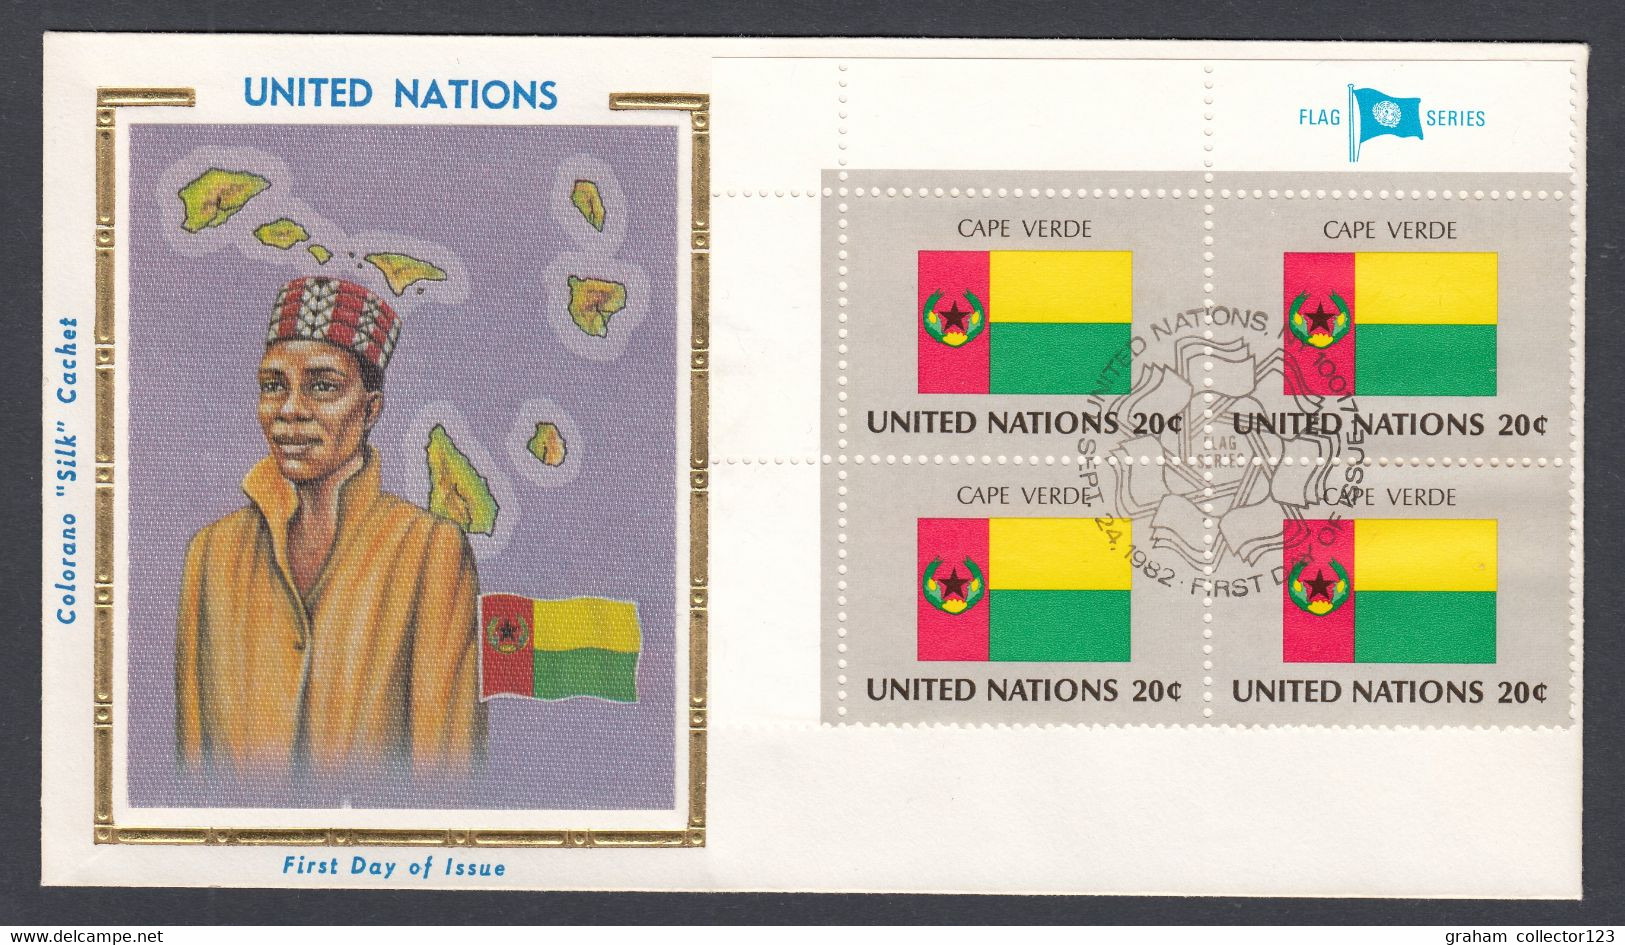 UN United Nations Flag Series Block Of Stamps On First Day Cover Cape Verde Flag 1982 - Covers & Documents